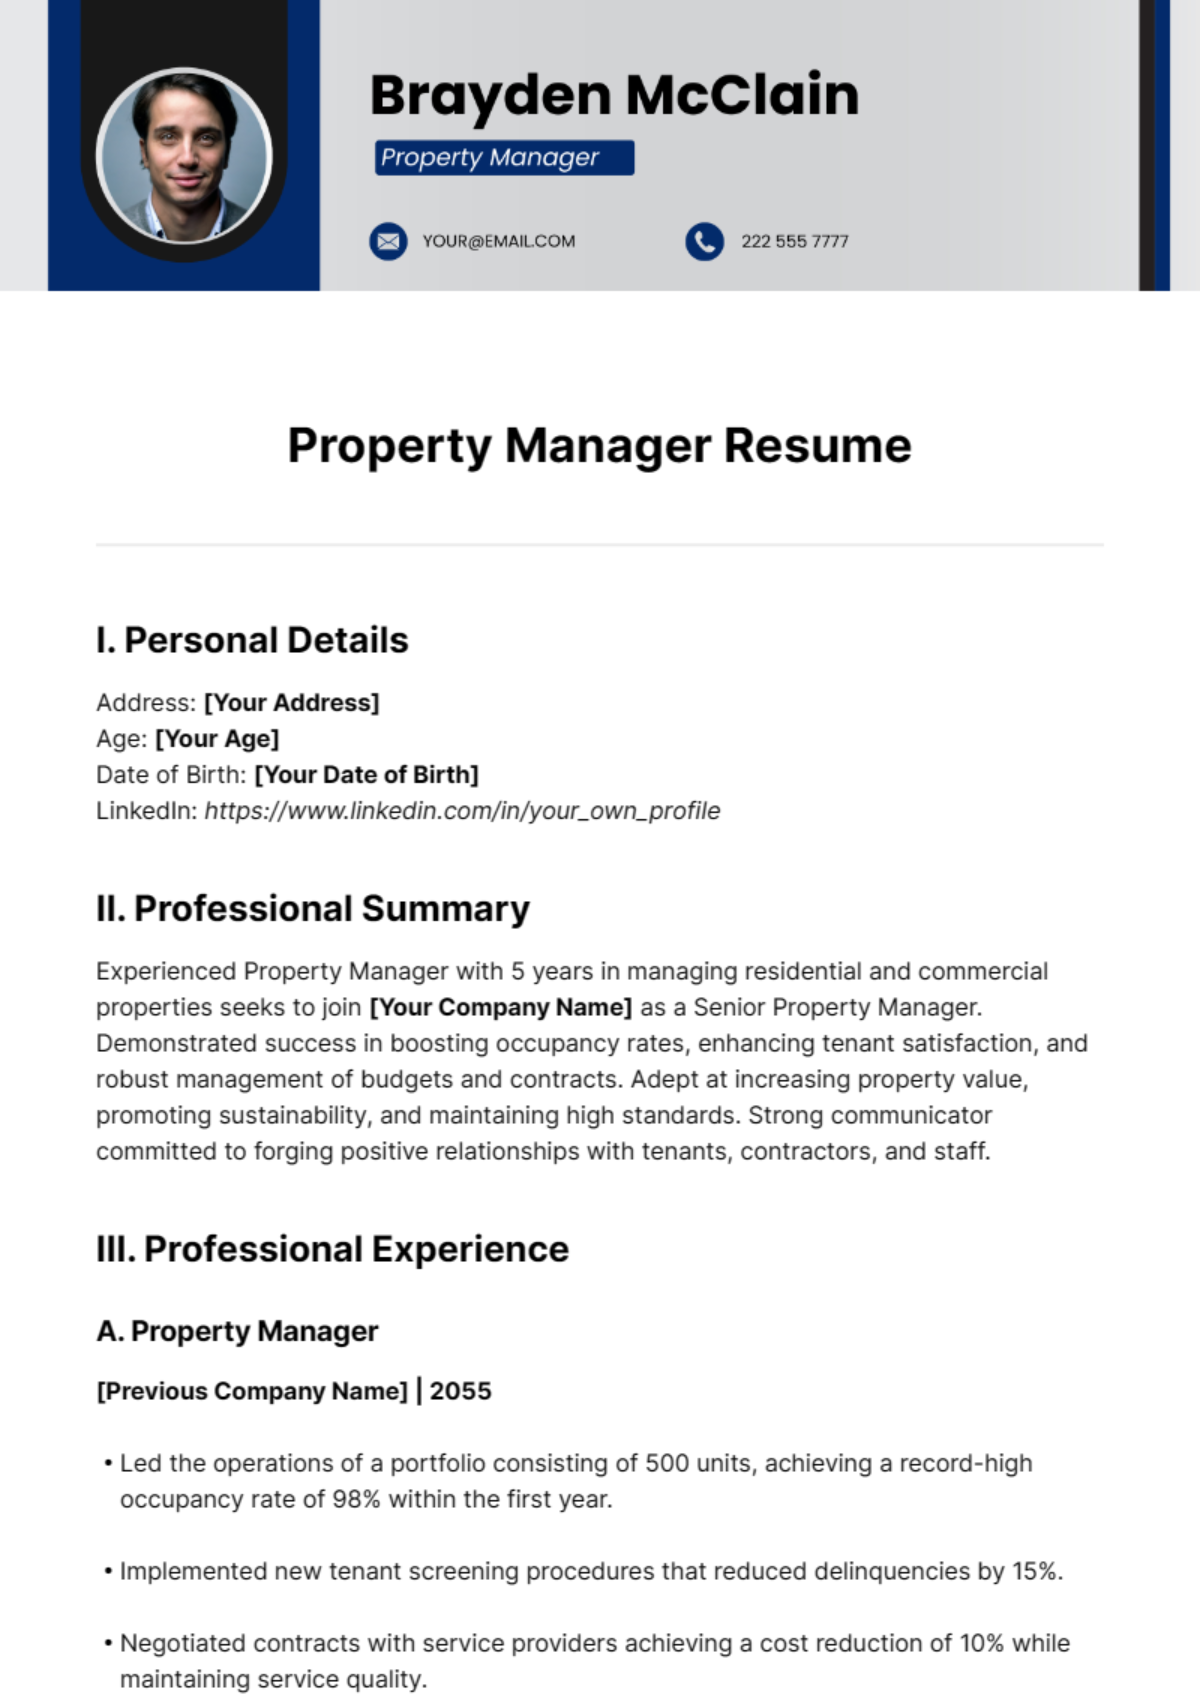 Property Manager Resume Template